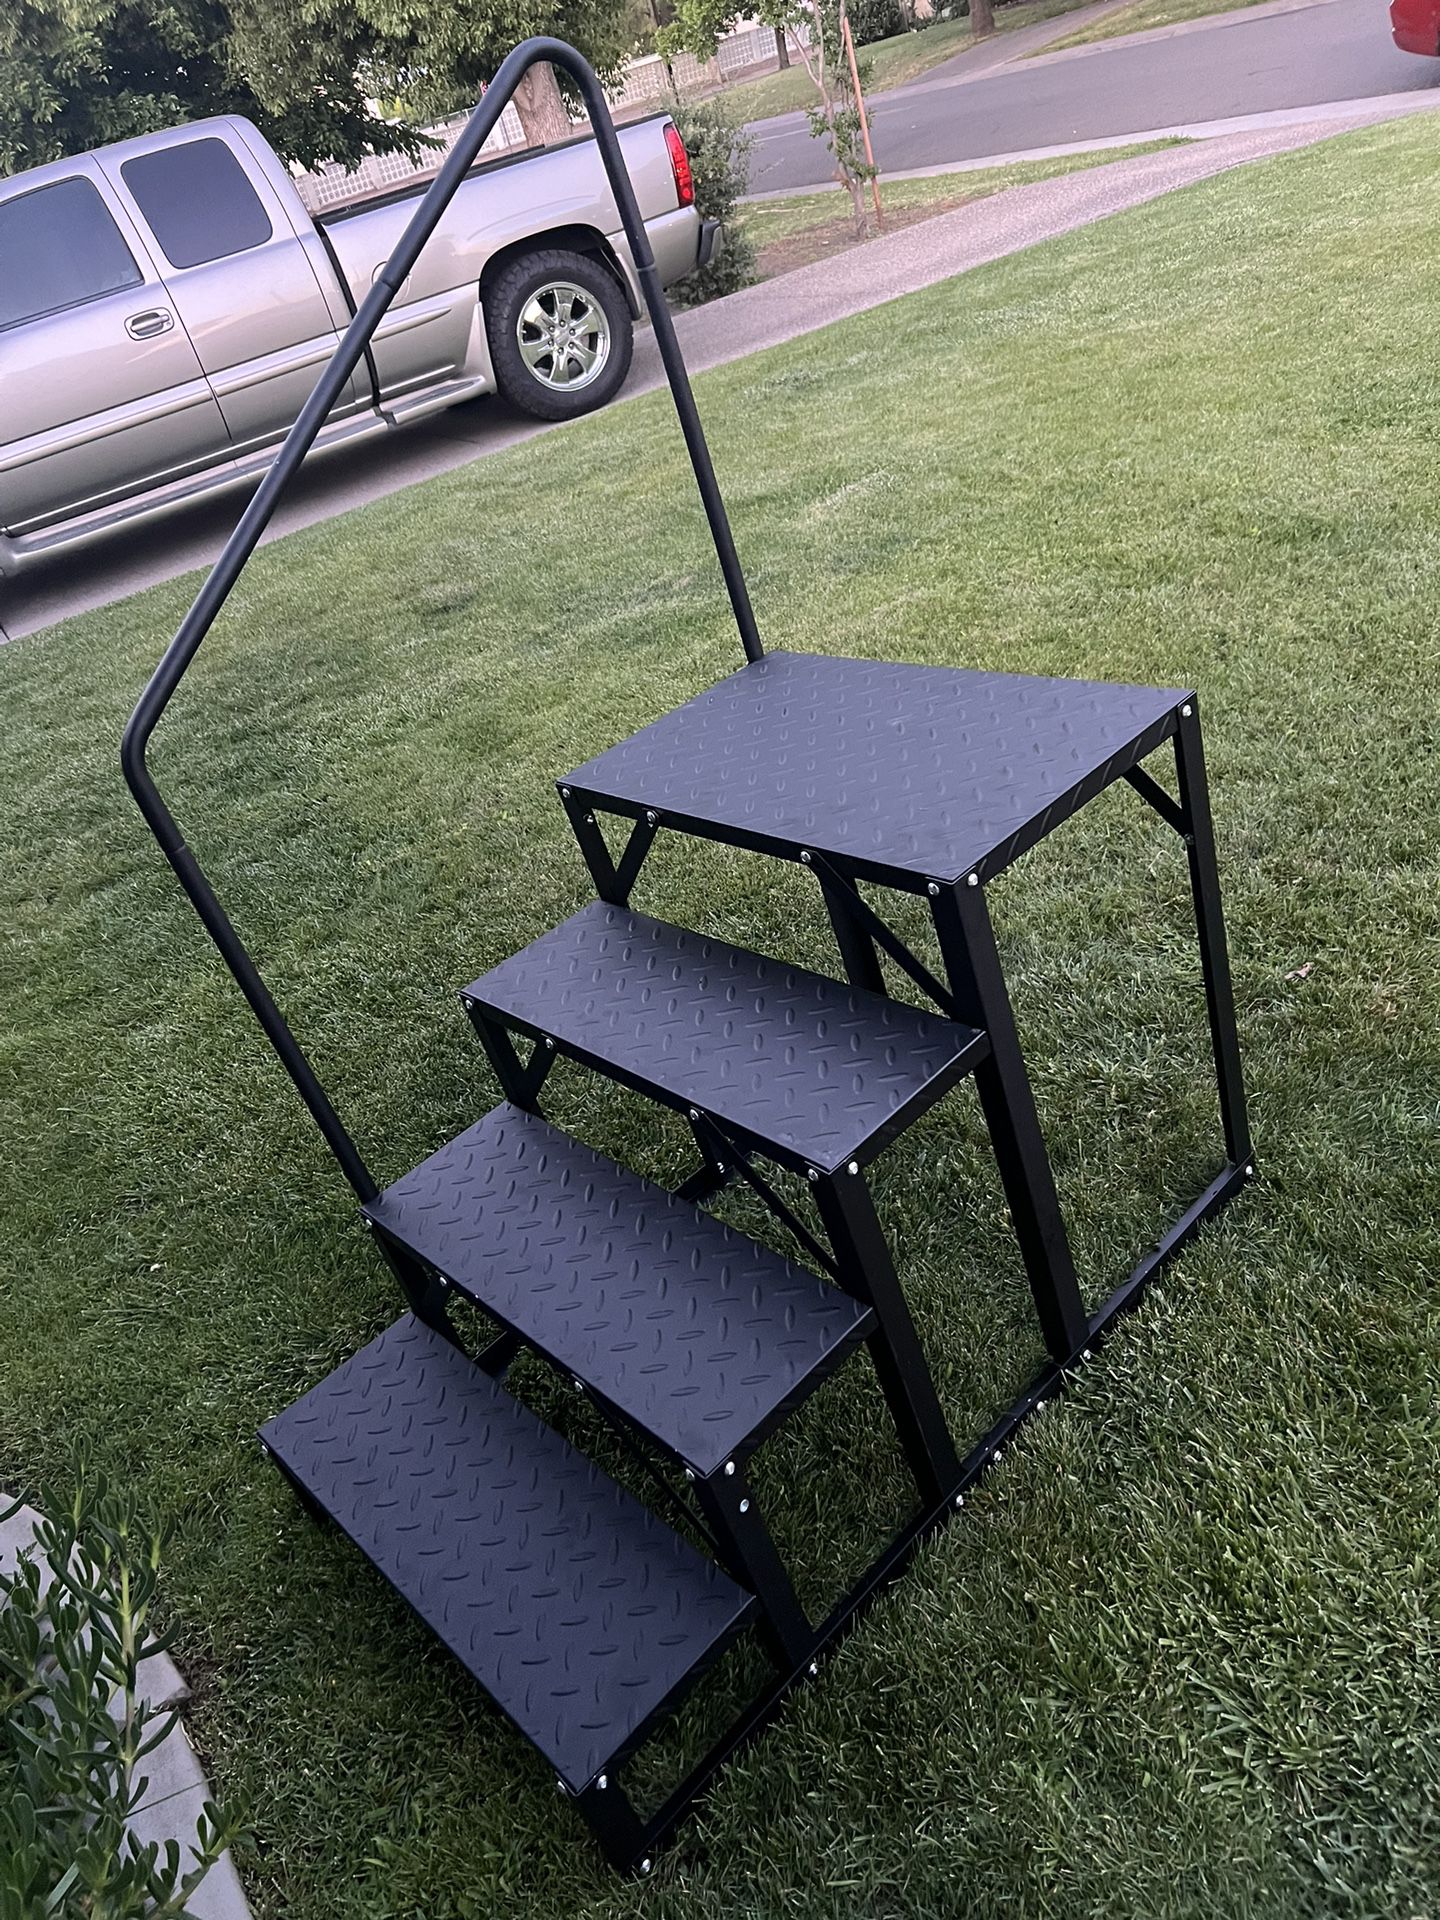 4 Step Stairs 5th Wheel Stair Hot Tub Steps Outdoor RV Step Ladder Support Economy Stair Riser Quick Eases Boarding and Exitingfor RVs and Travel Camp